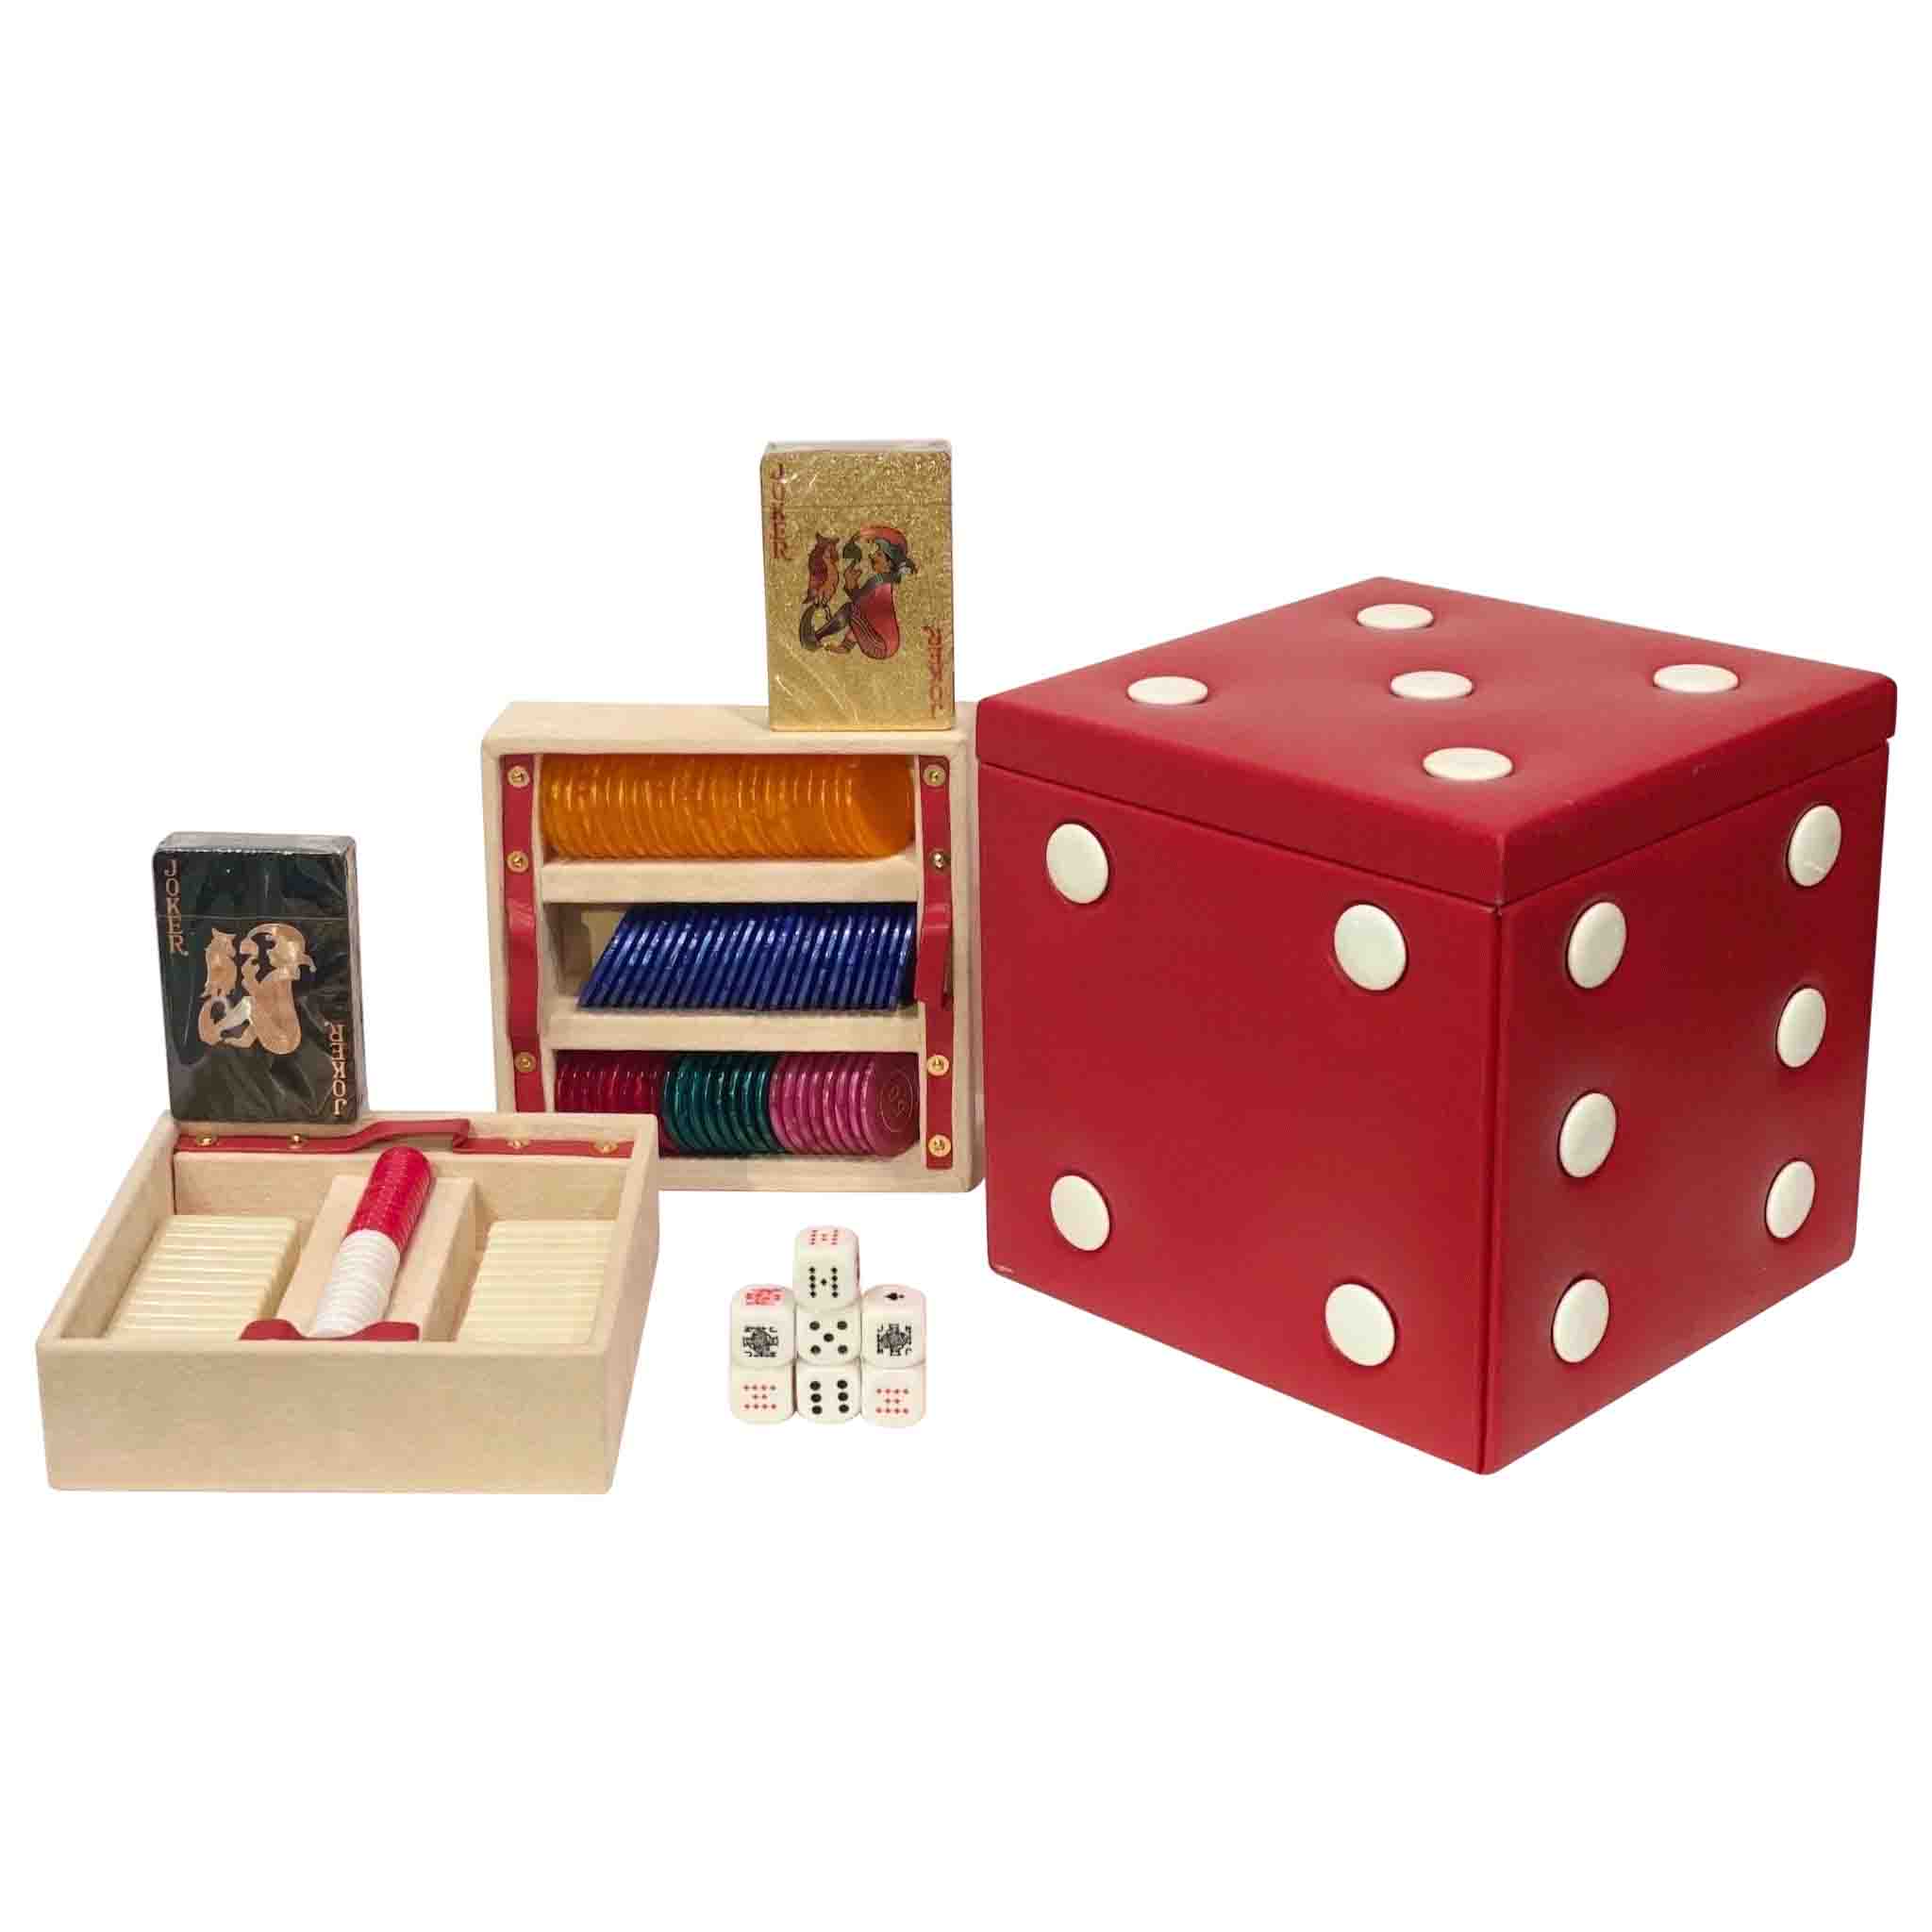 Super Rare Vintage Gucci Poker Card Set Dice Chips Luxury Game Red Leather  Italy